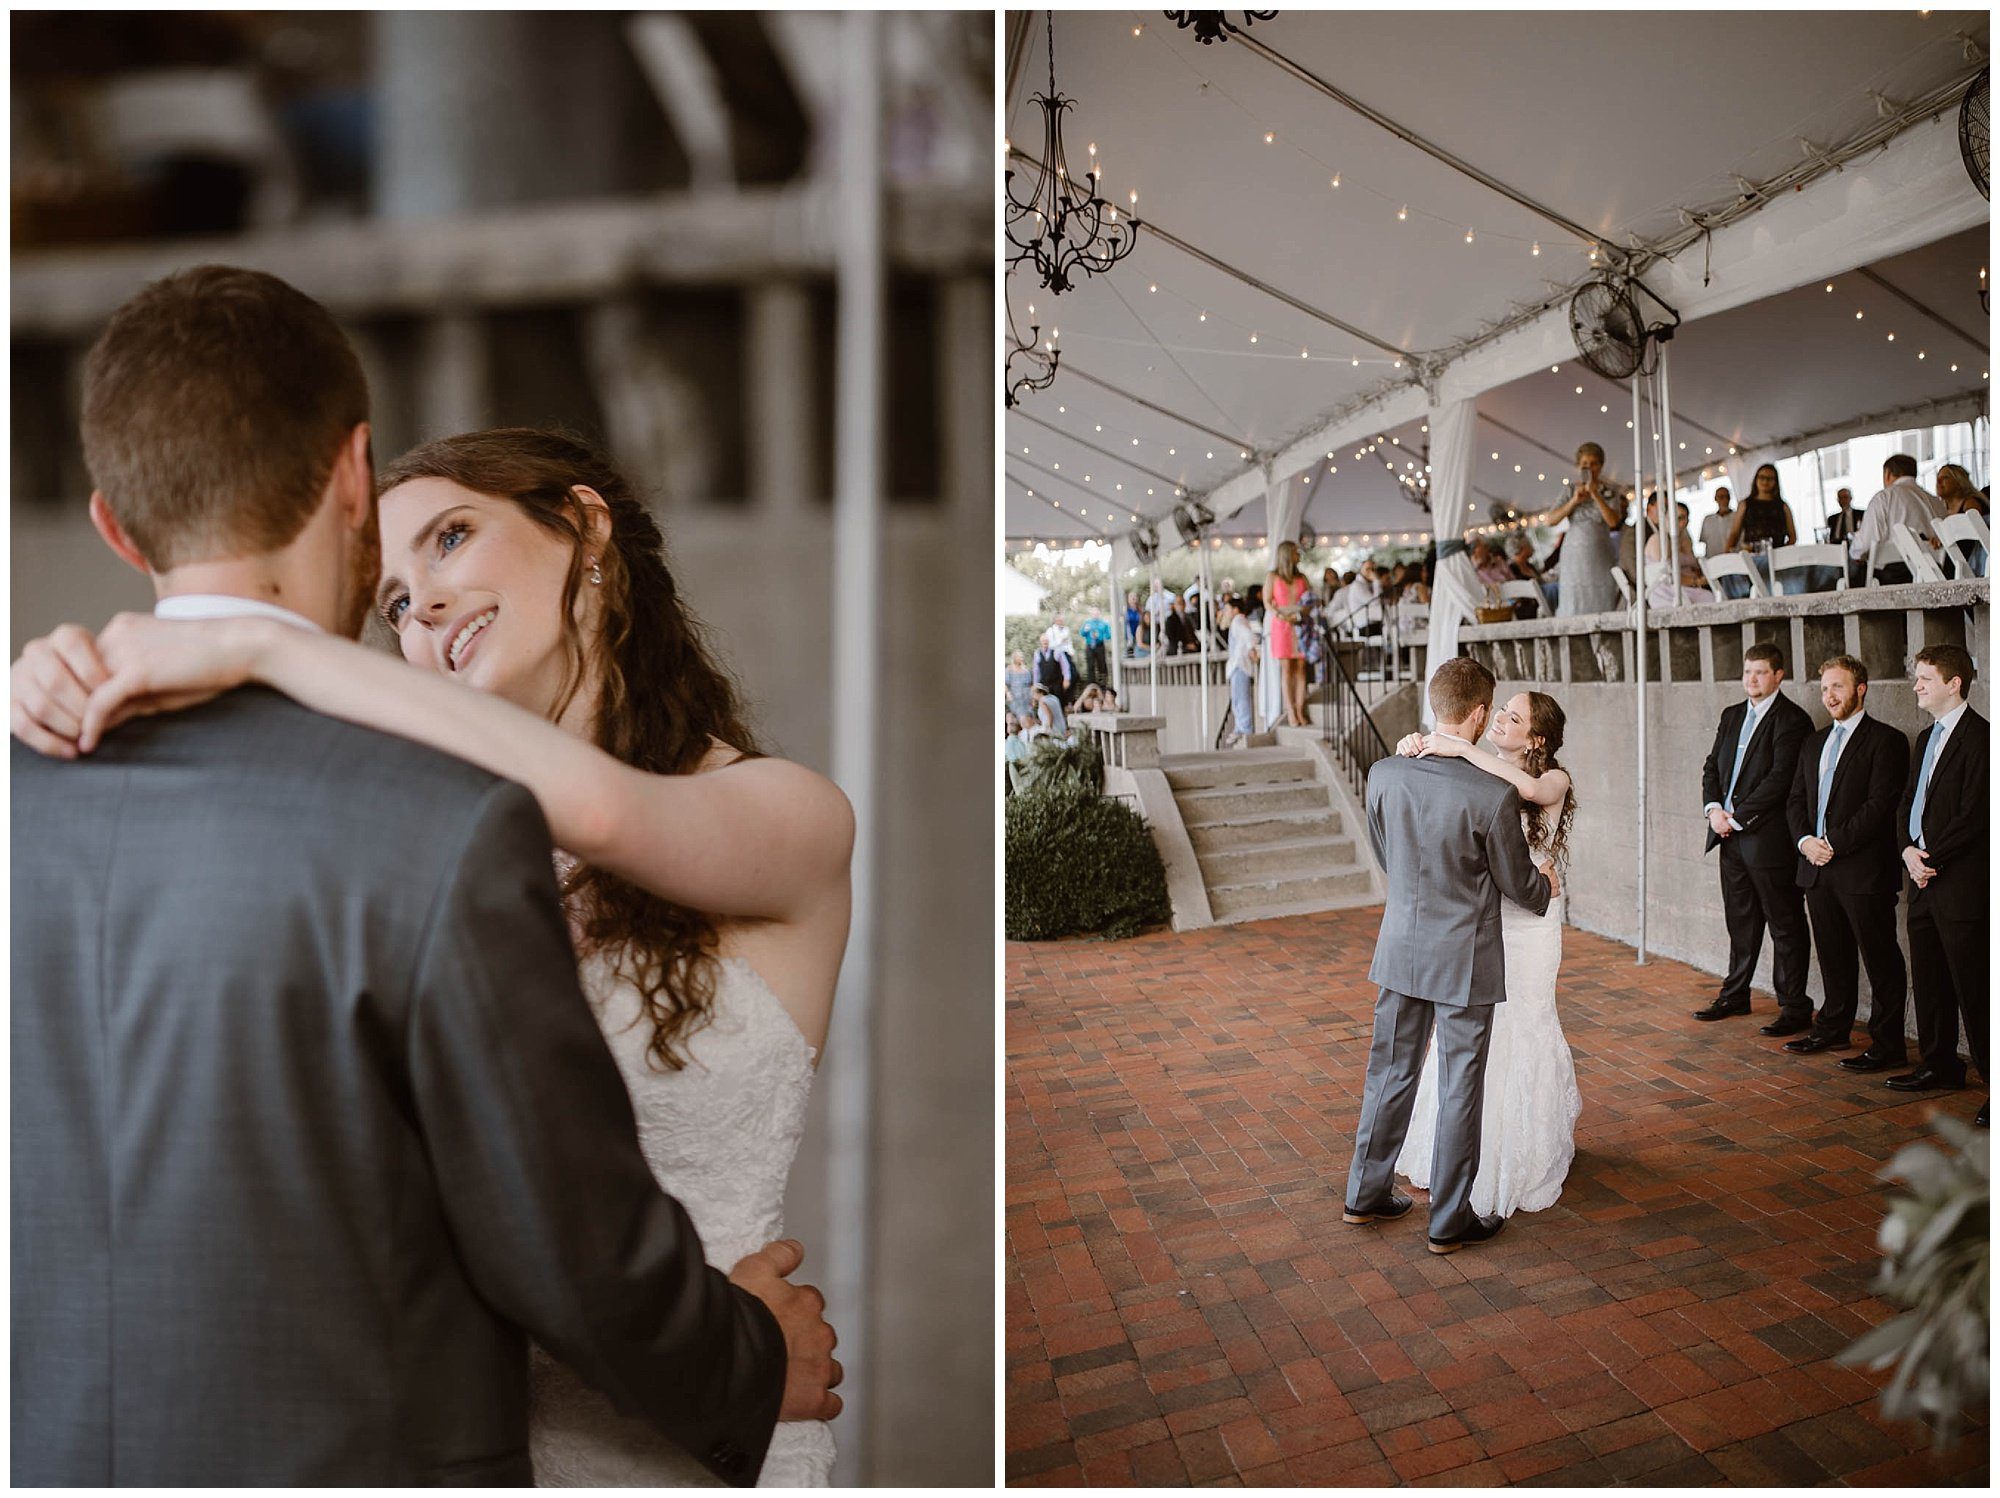 Bride and Groom First Dance at Crescent Bend House Wedding Knoxville